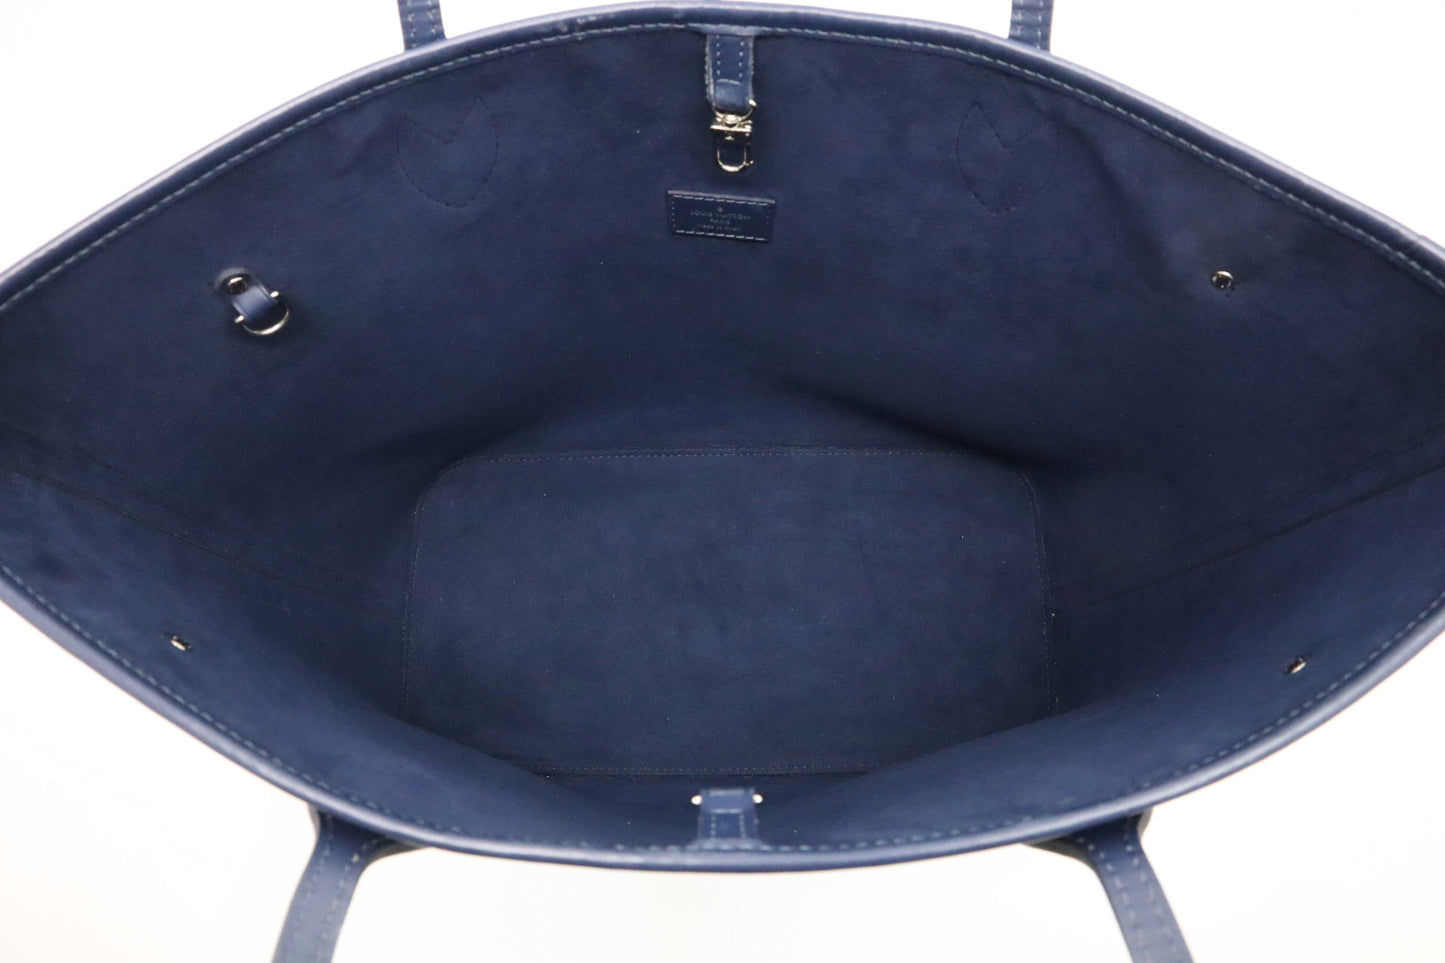 Louis Vuitton Neverfull MM in Navy Blue Epi Leather